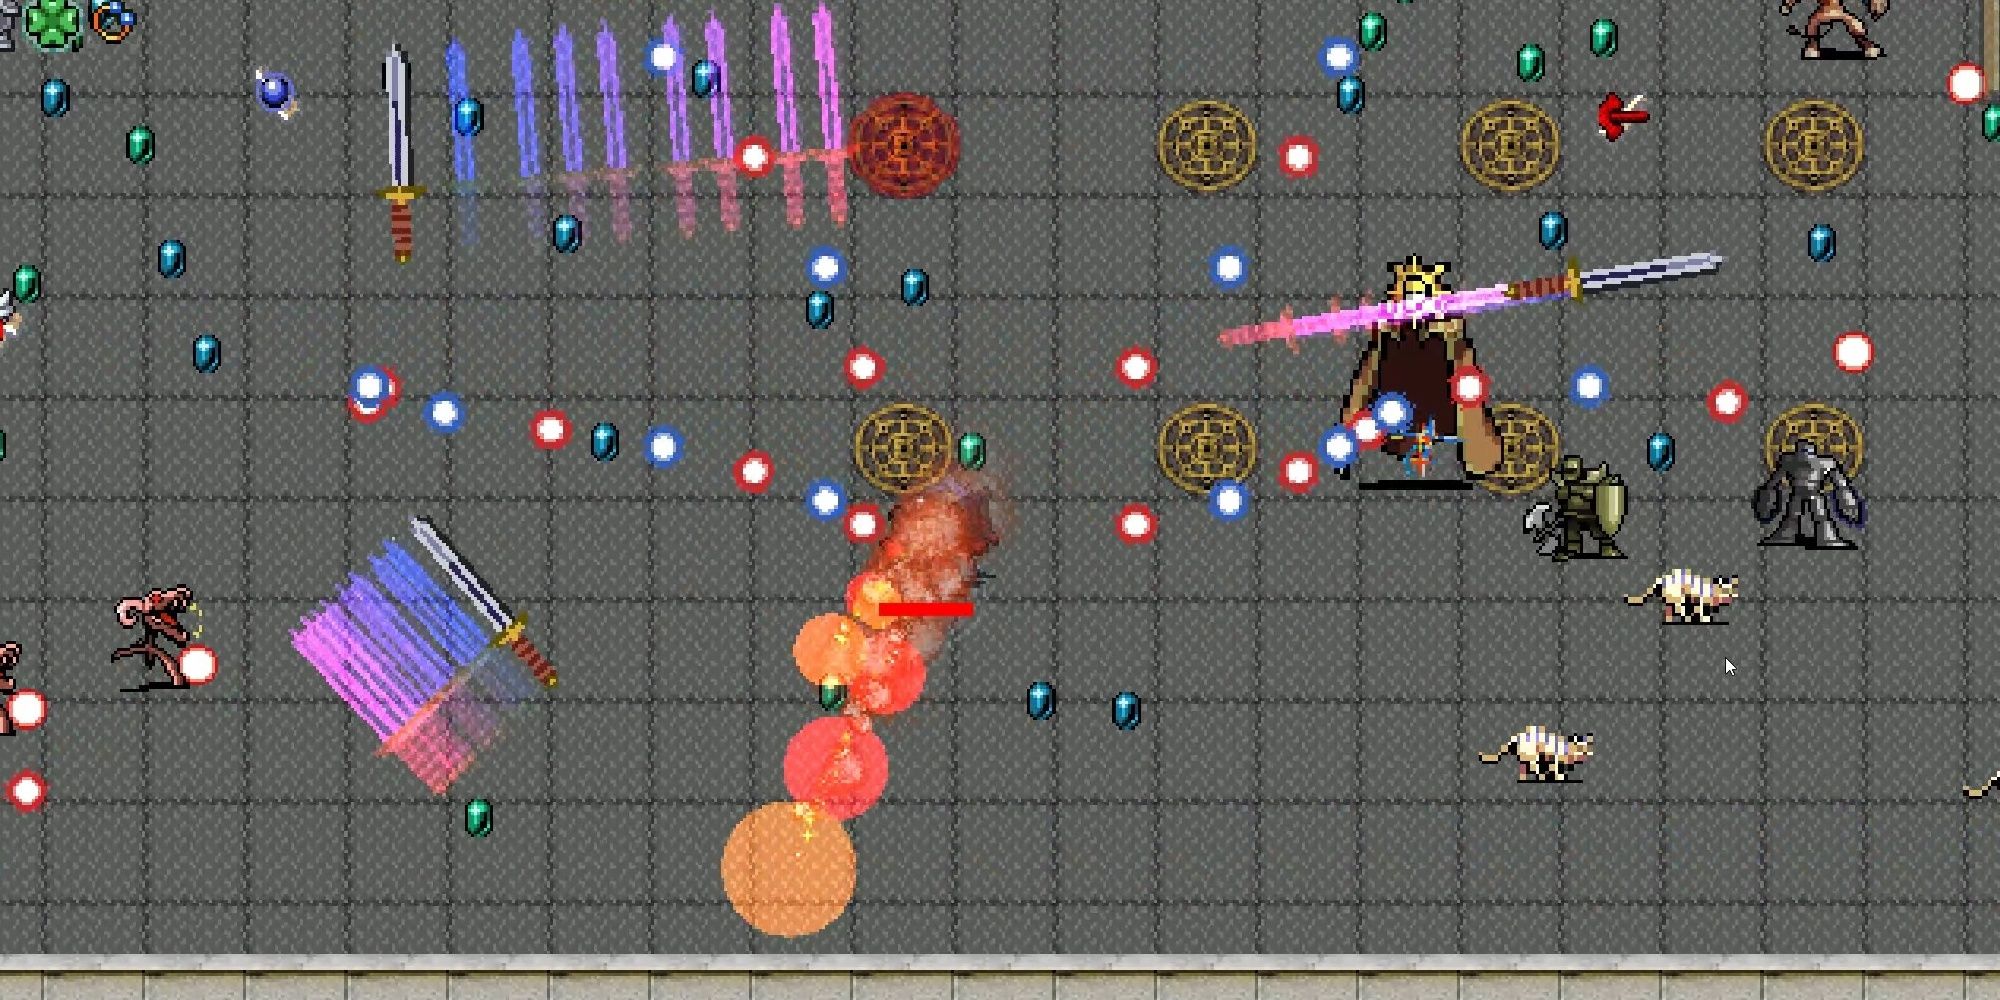 The player spews fire in the middle of the screen. Heaven Sword projectiles fly around the map, leaving behind a rainbow sheen